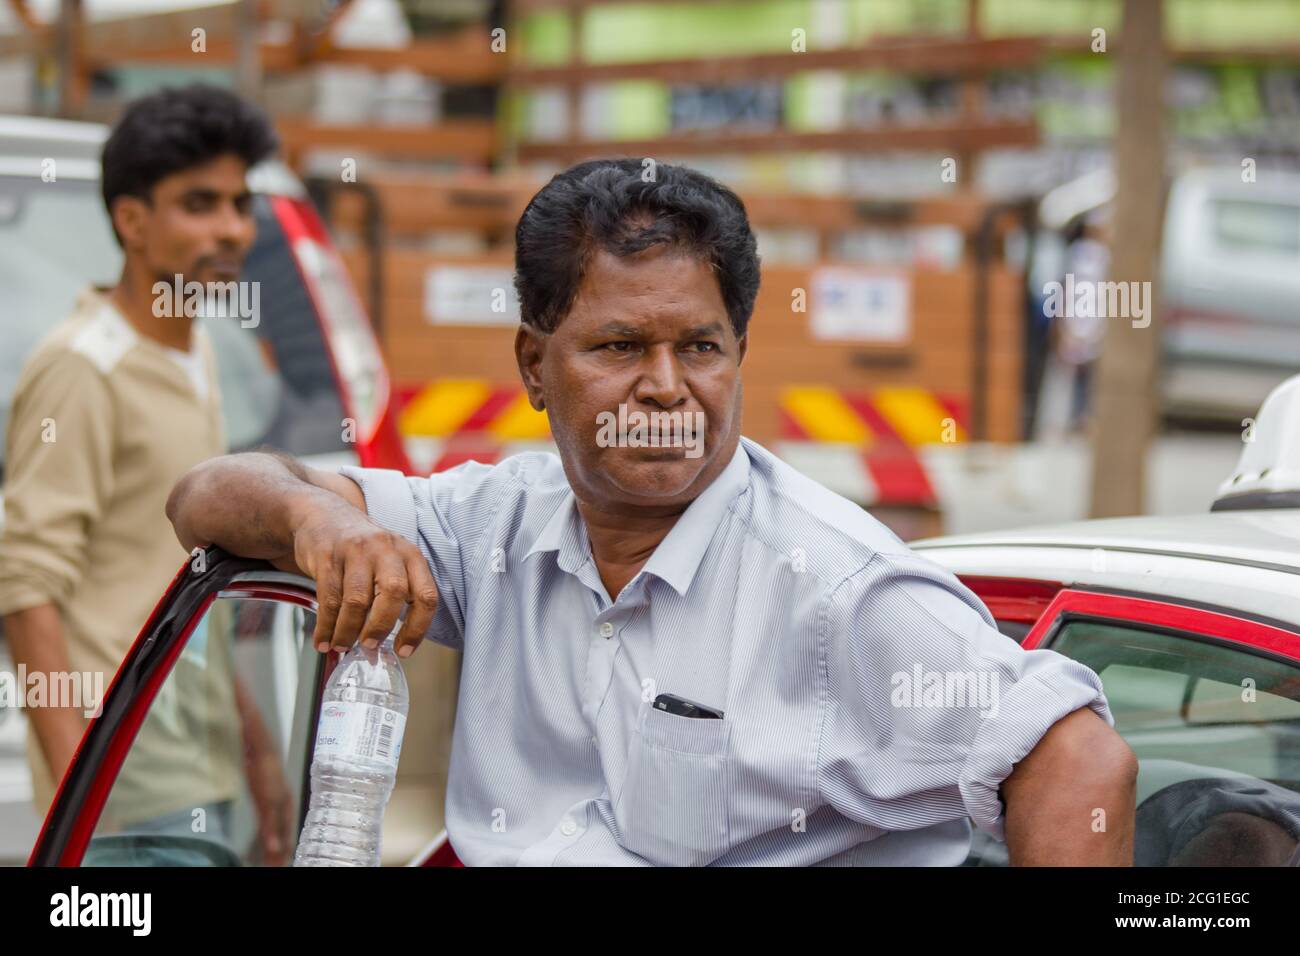 KUALA LUMPUR, MALAYSIA - DECEMBER 31, 2016 :taxi driver with water bottle looks. Stock Photo